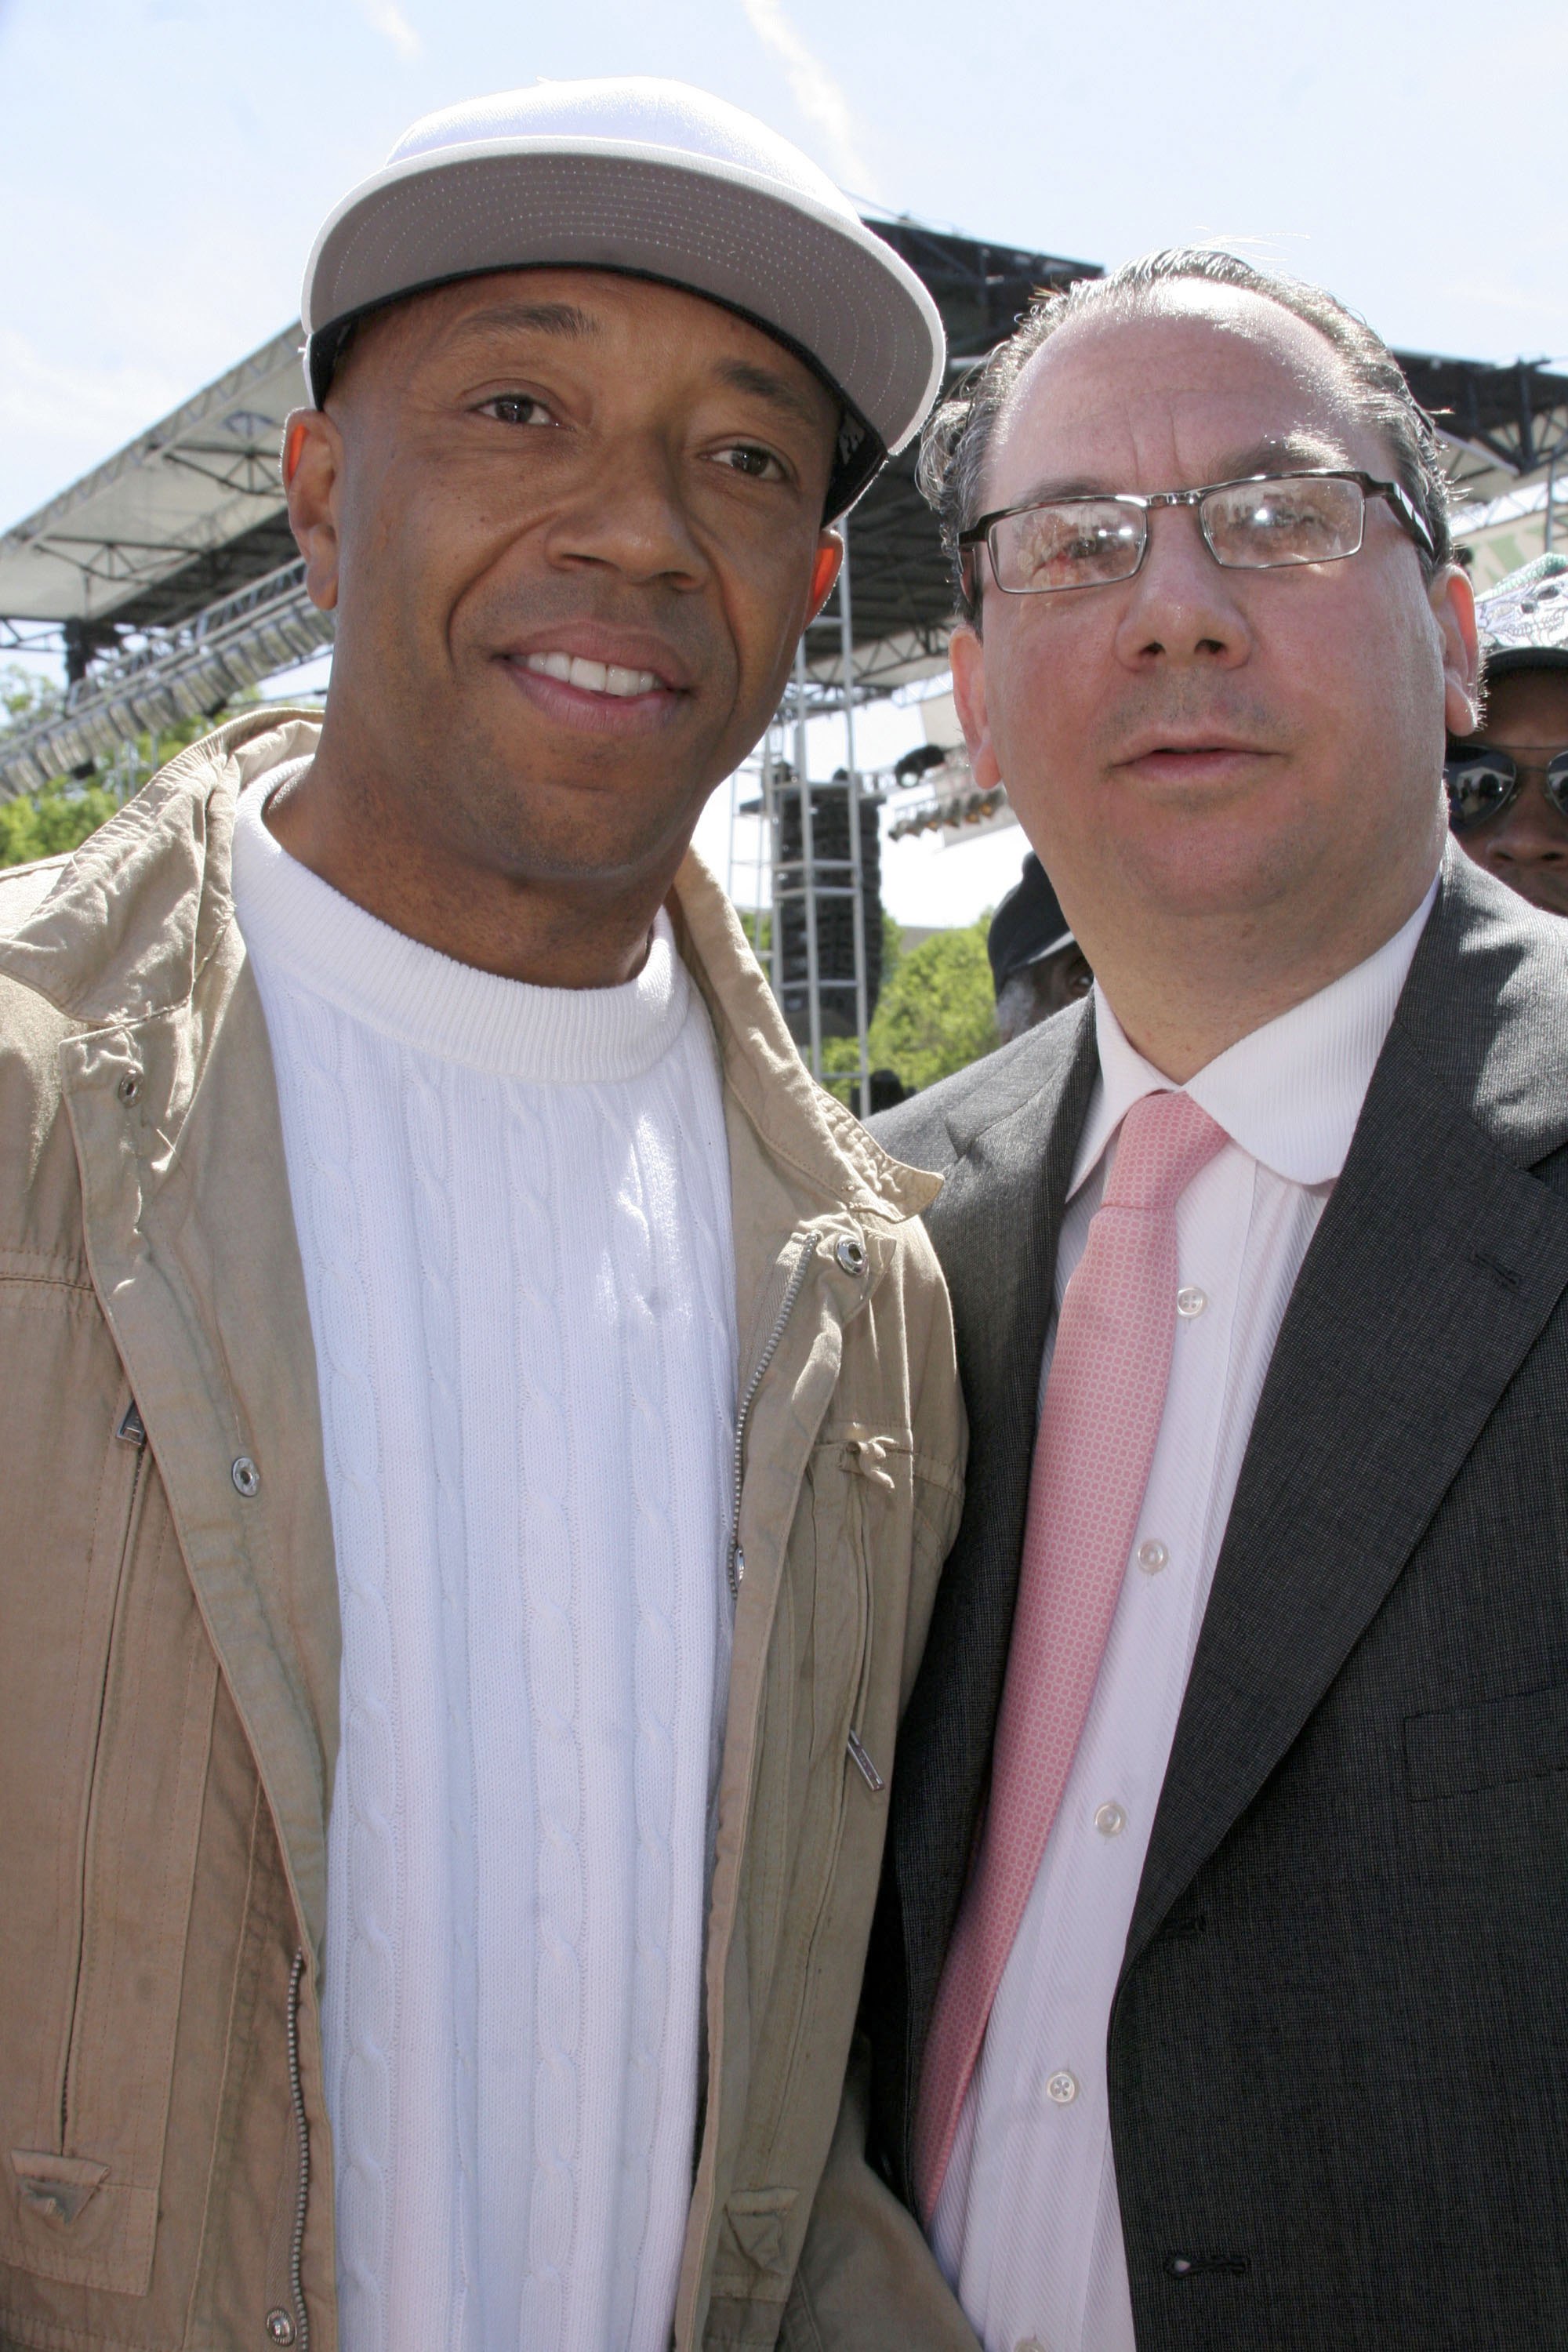 WASHINGTON - APRIL 30: Russell Simmons (L) and Rabbi Marc Schneier (R) arrive at "Save Darfur: Rally To Stop Genocide" April 30, 2006 in Washington, DC. (Photo by Nancy Ostertag/Getty Images)